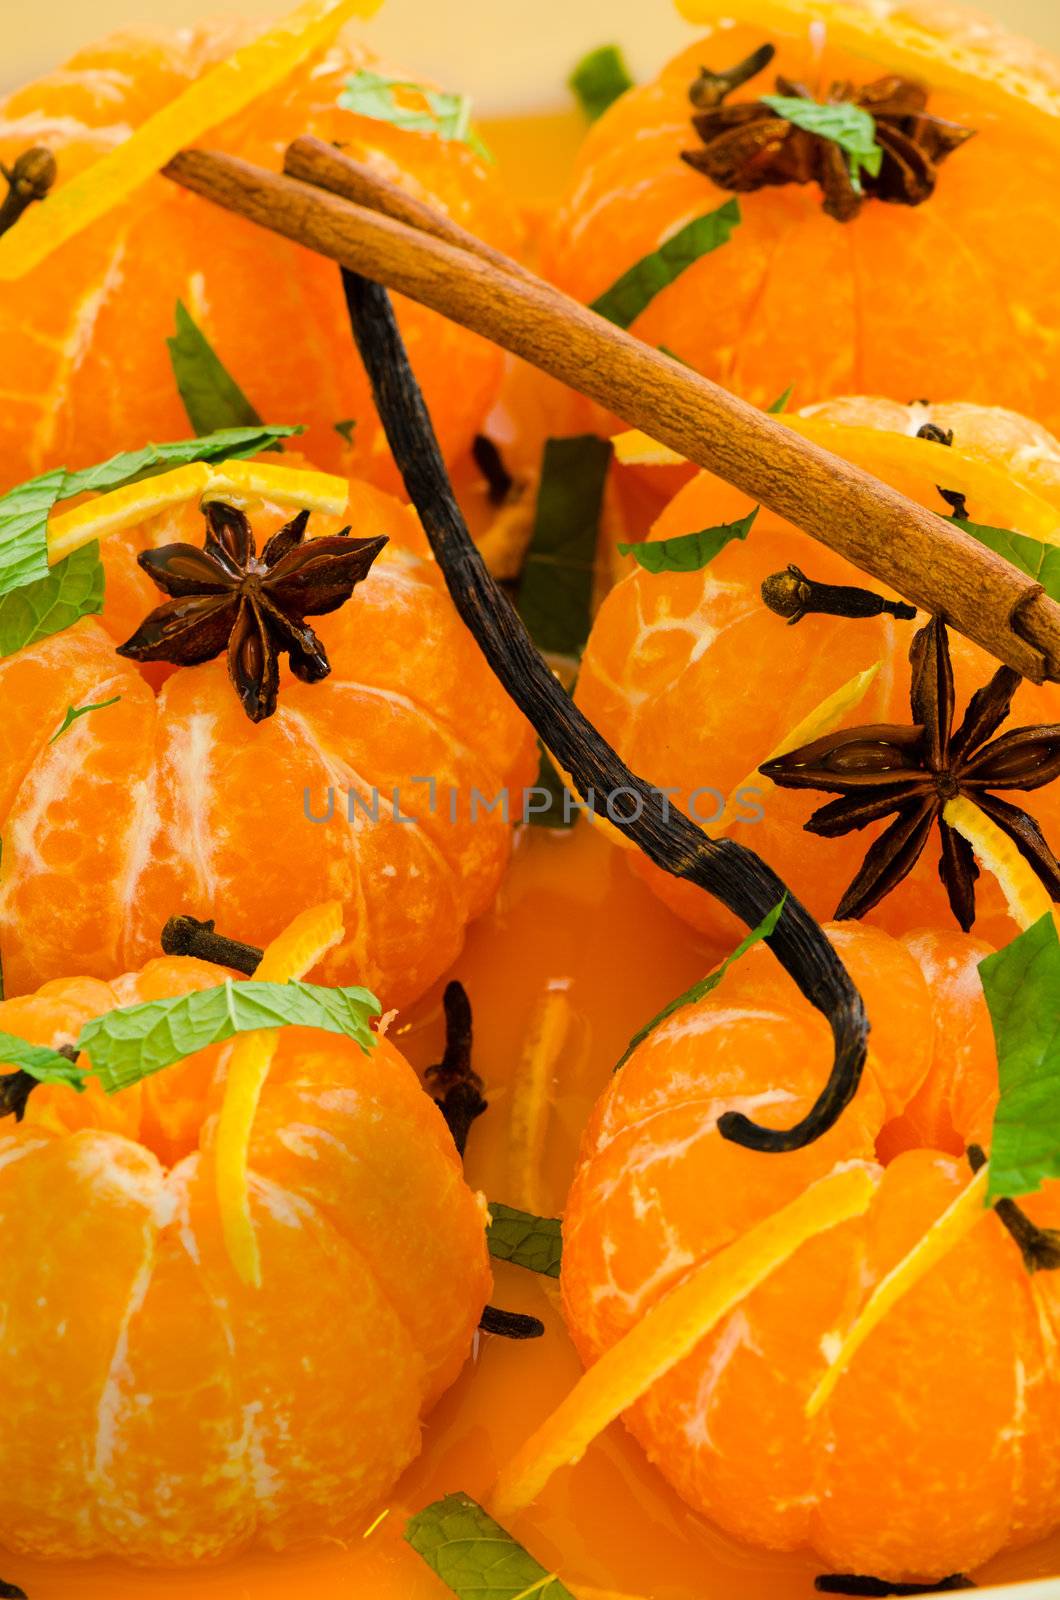 Mandarins in spiced syrup with cinnamon, star anise, vanilla and fresh mint